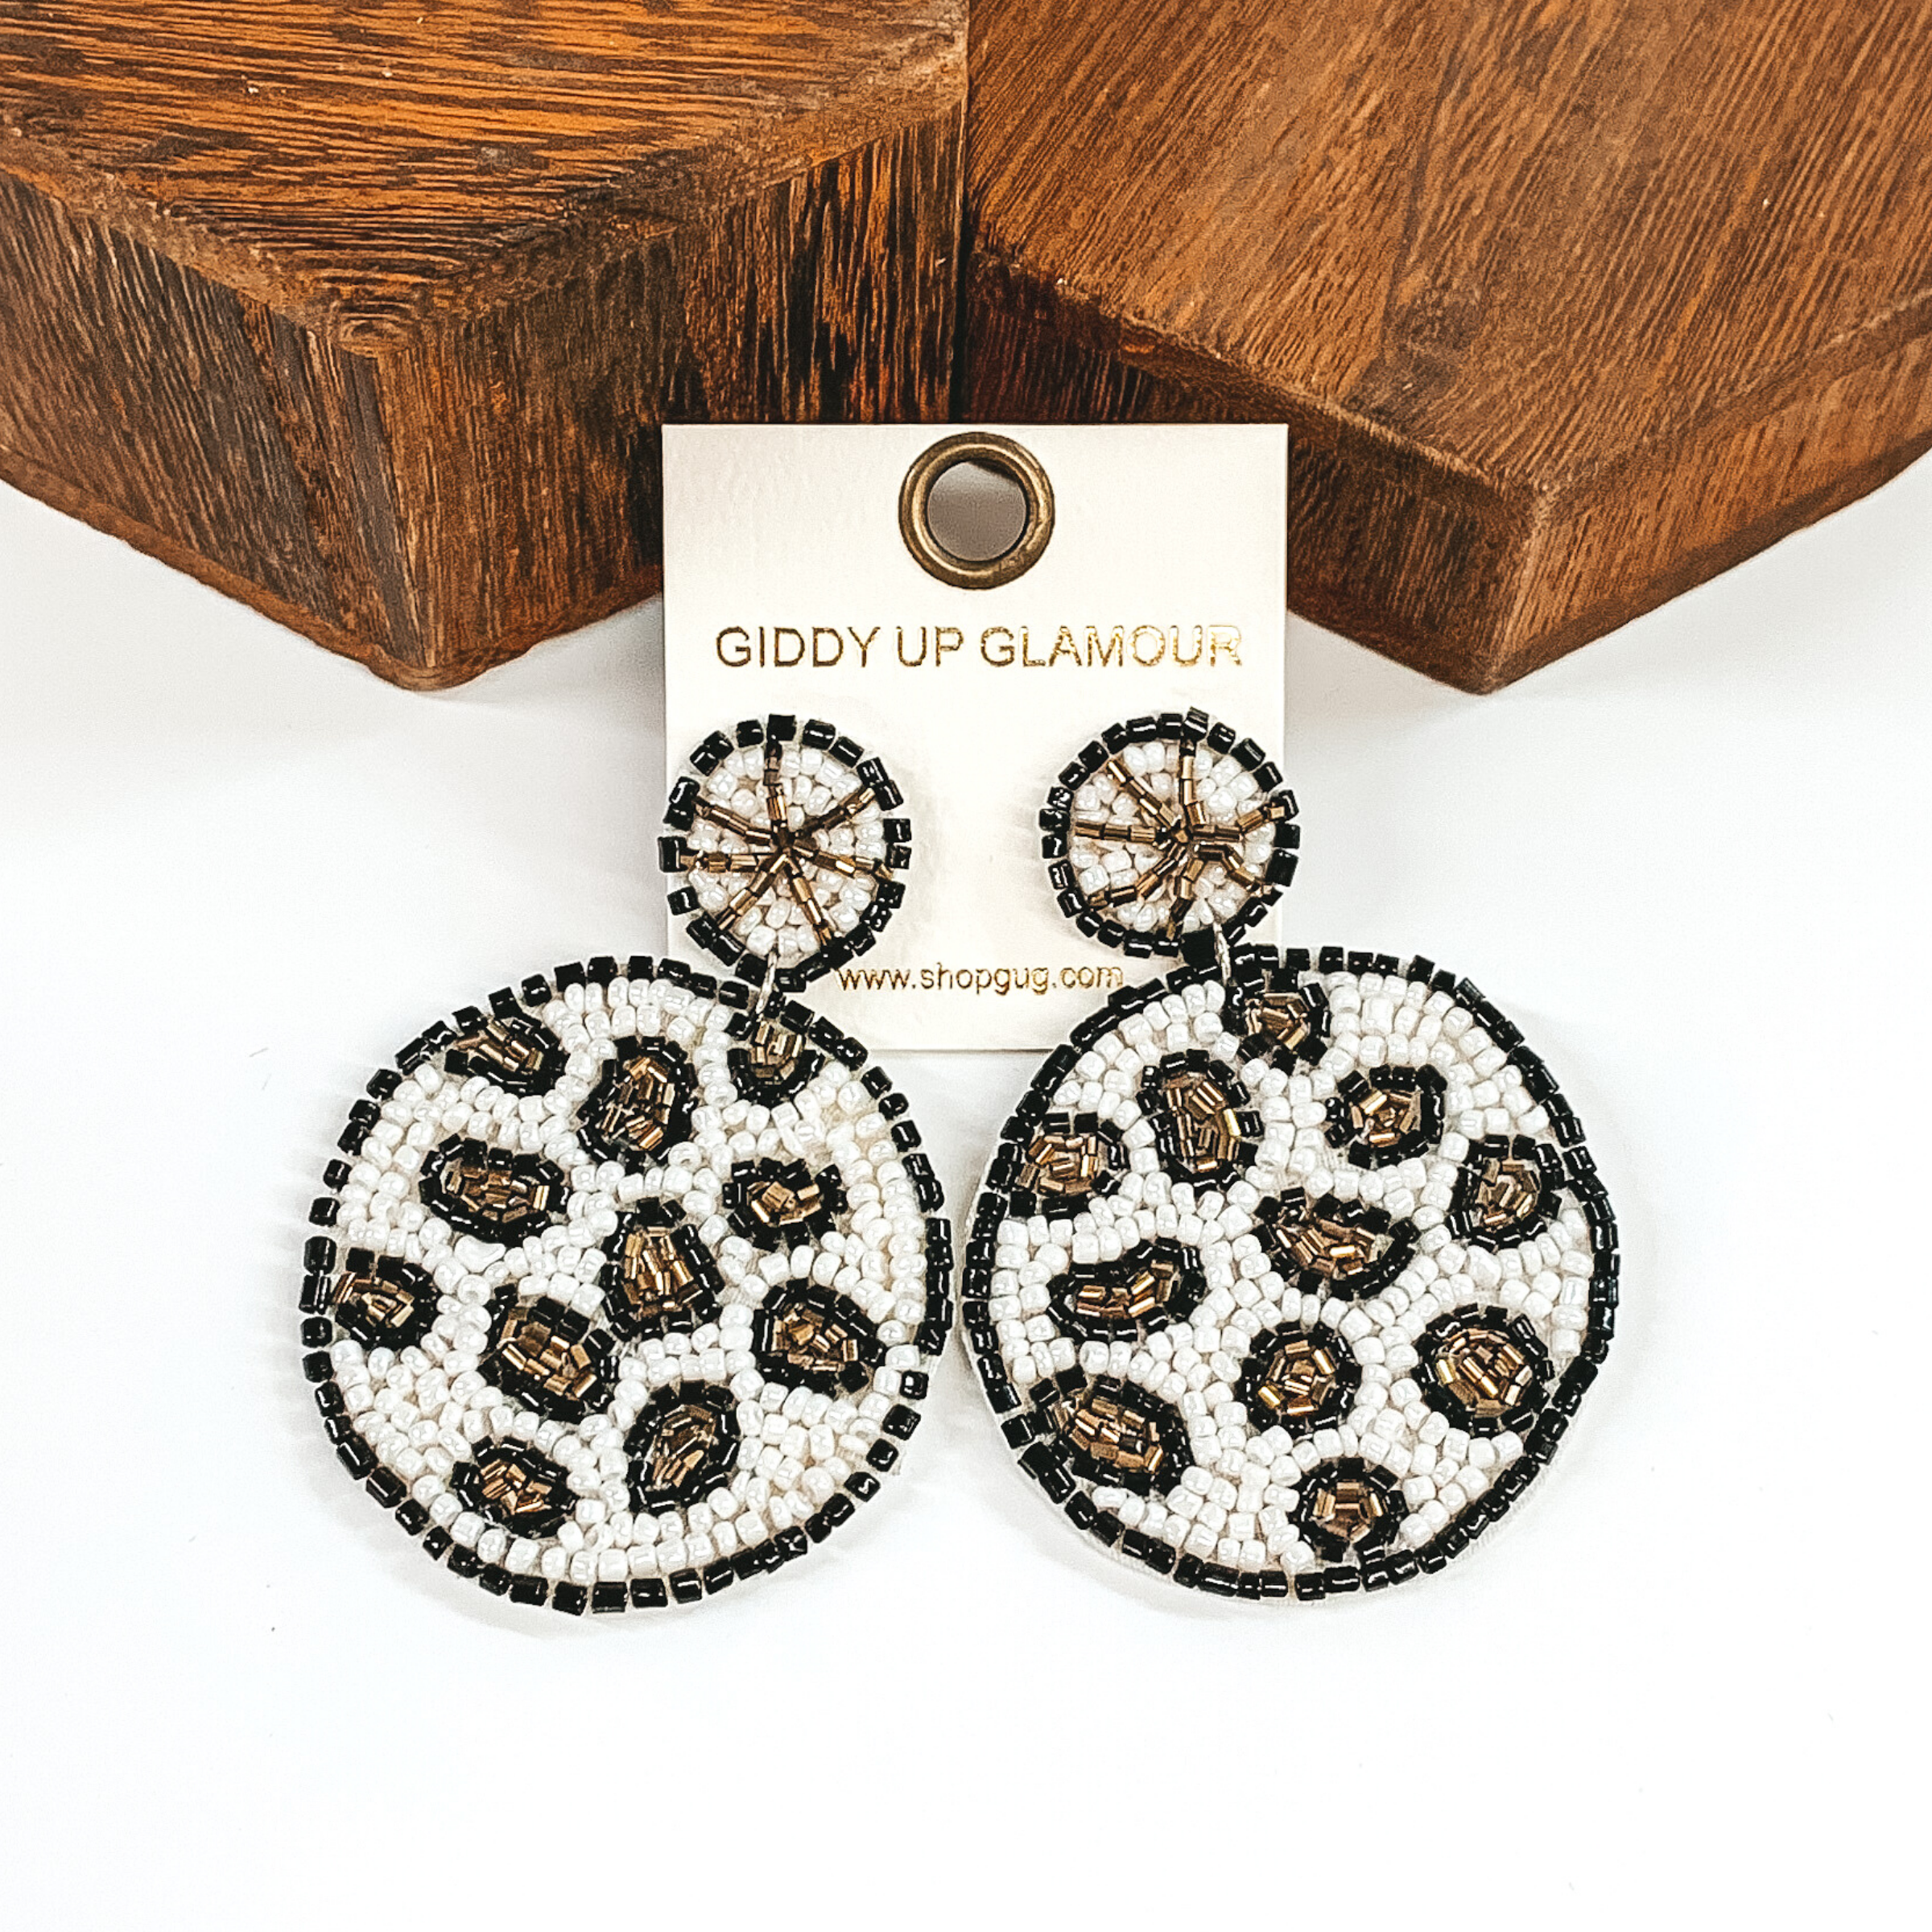 The studs are a small beaded circle with a hanging larger beaded circle. These beaded earrings includes the colors white, black, and gold in a leopard design. These earrings are pictured on a white background with brown blocks behind the earrings. 